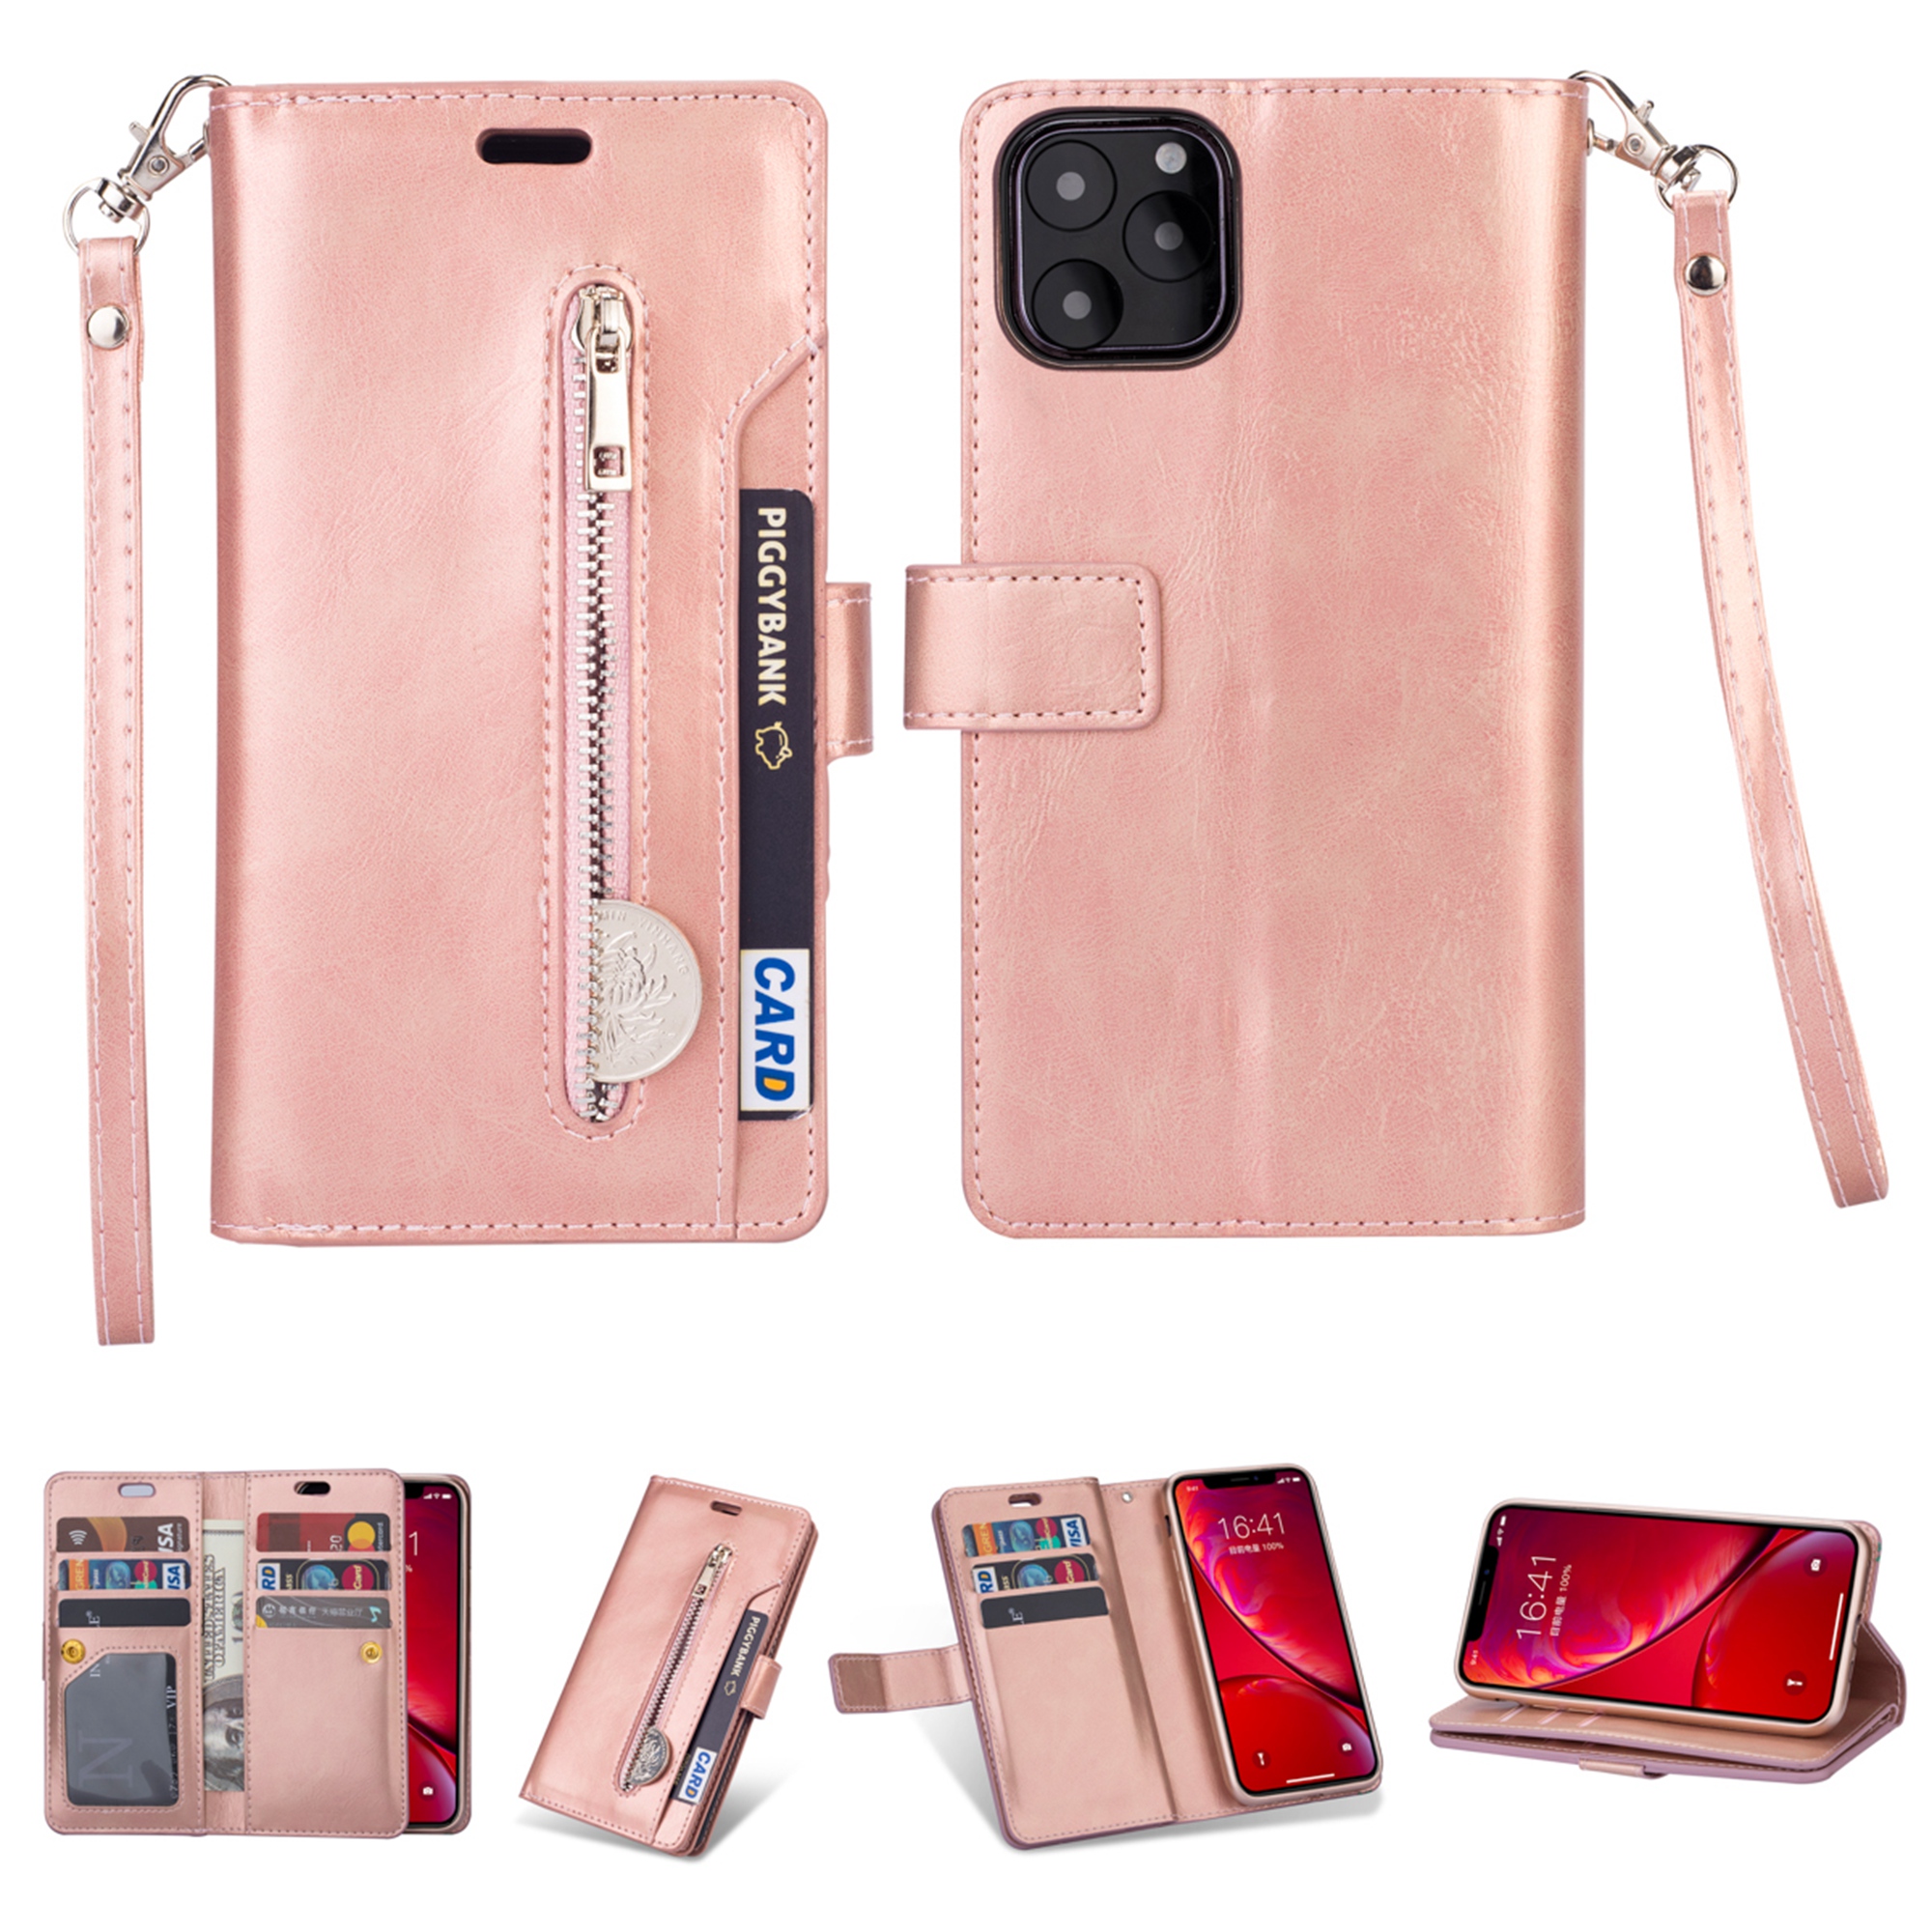 iPhone 11 6.1 inch Wallet Case, Dteck 9 Card Slots Premium Leather Zipper Purse case Flip Kickstand Folio Magnetic with Wrist Strap Credit Cash Cover For Apple iPhone 11, Rosegold - image 1 of 7